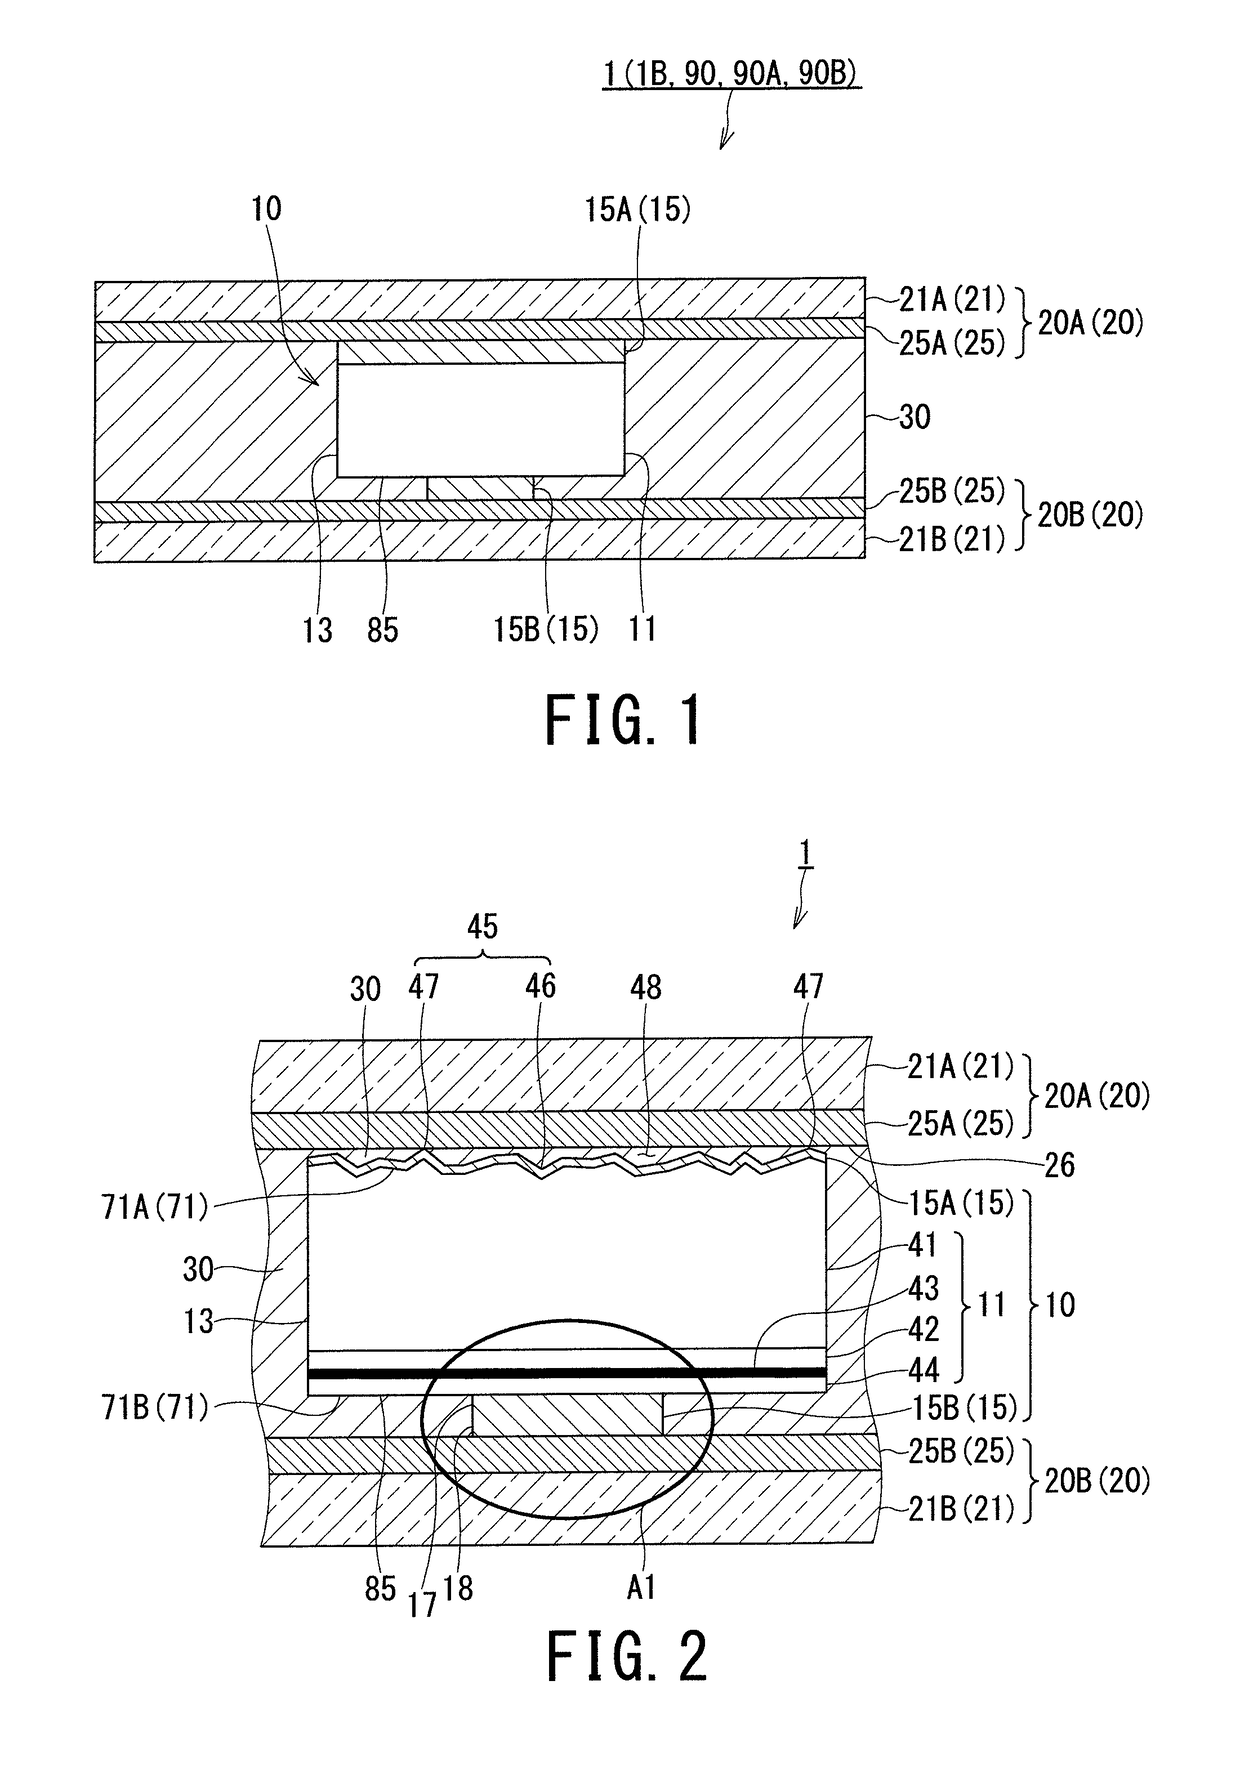 Light-emitting device with improved flexural resistance and electrical connection between layers, production method therefor, and device using light-emitting device